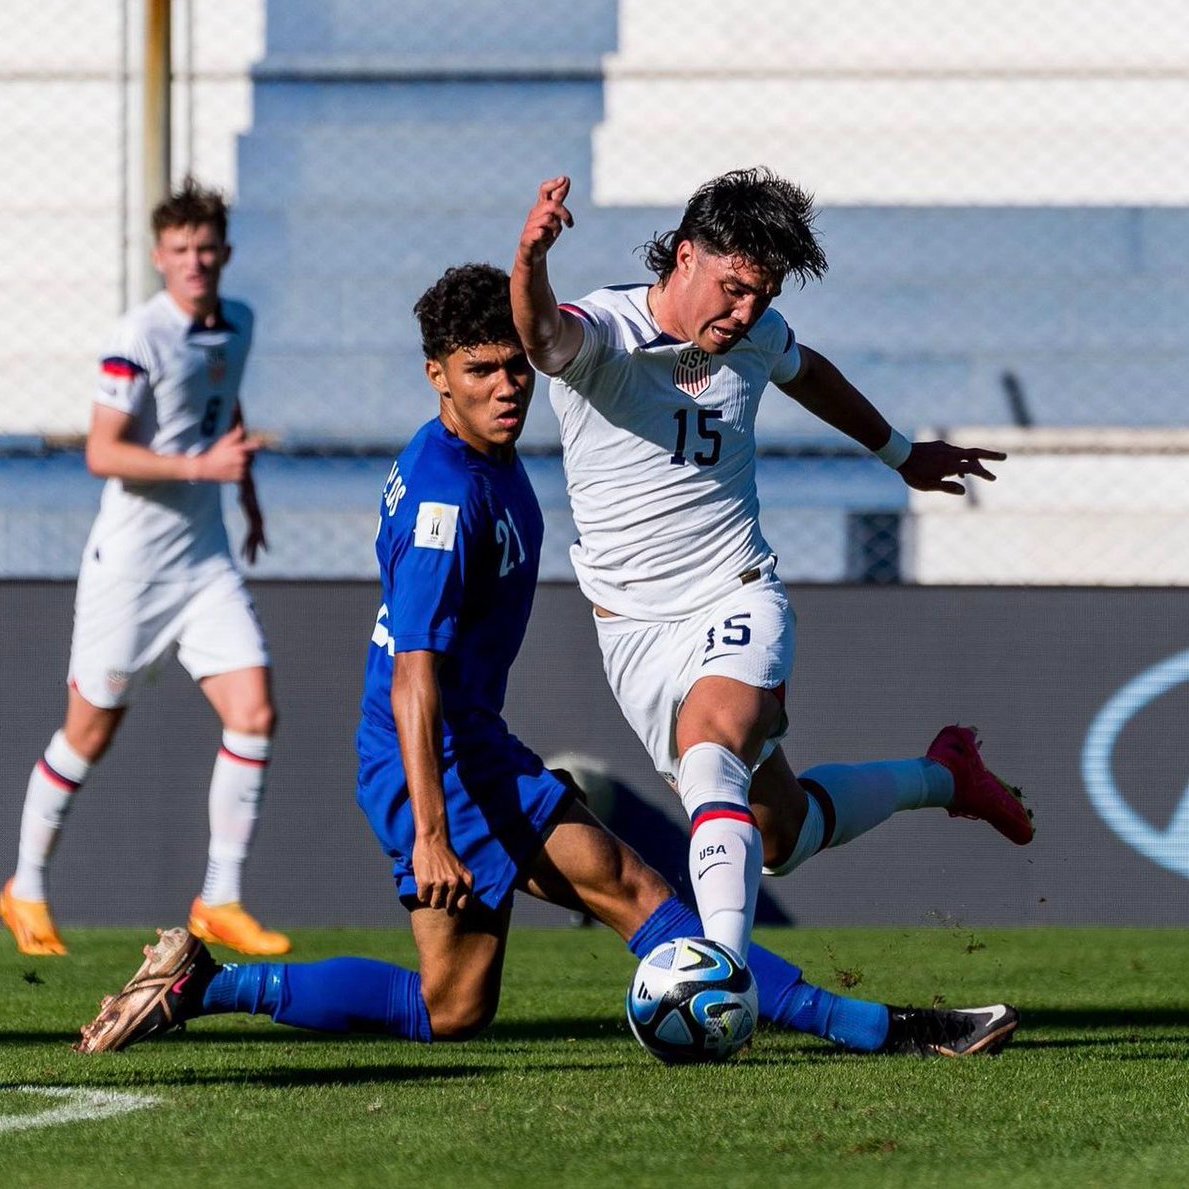 ATTENTION BAY AREA SOCCER FANS!!!

Current San Jose Earthquakes Players Niko Tsakiris and Cade Cowell both just scored in the U-20 World Cup for #USYNT 

If Cade Cowell and Niko Tsakiris keep playing like how they are in this U-20 World Cup, they won't be in San Jose for long!…